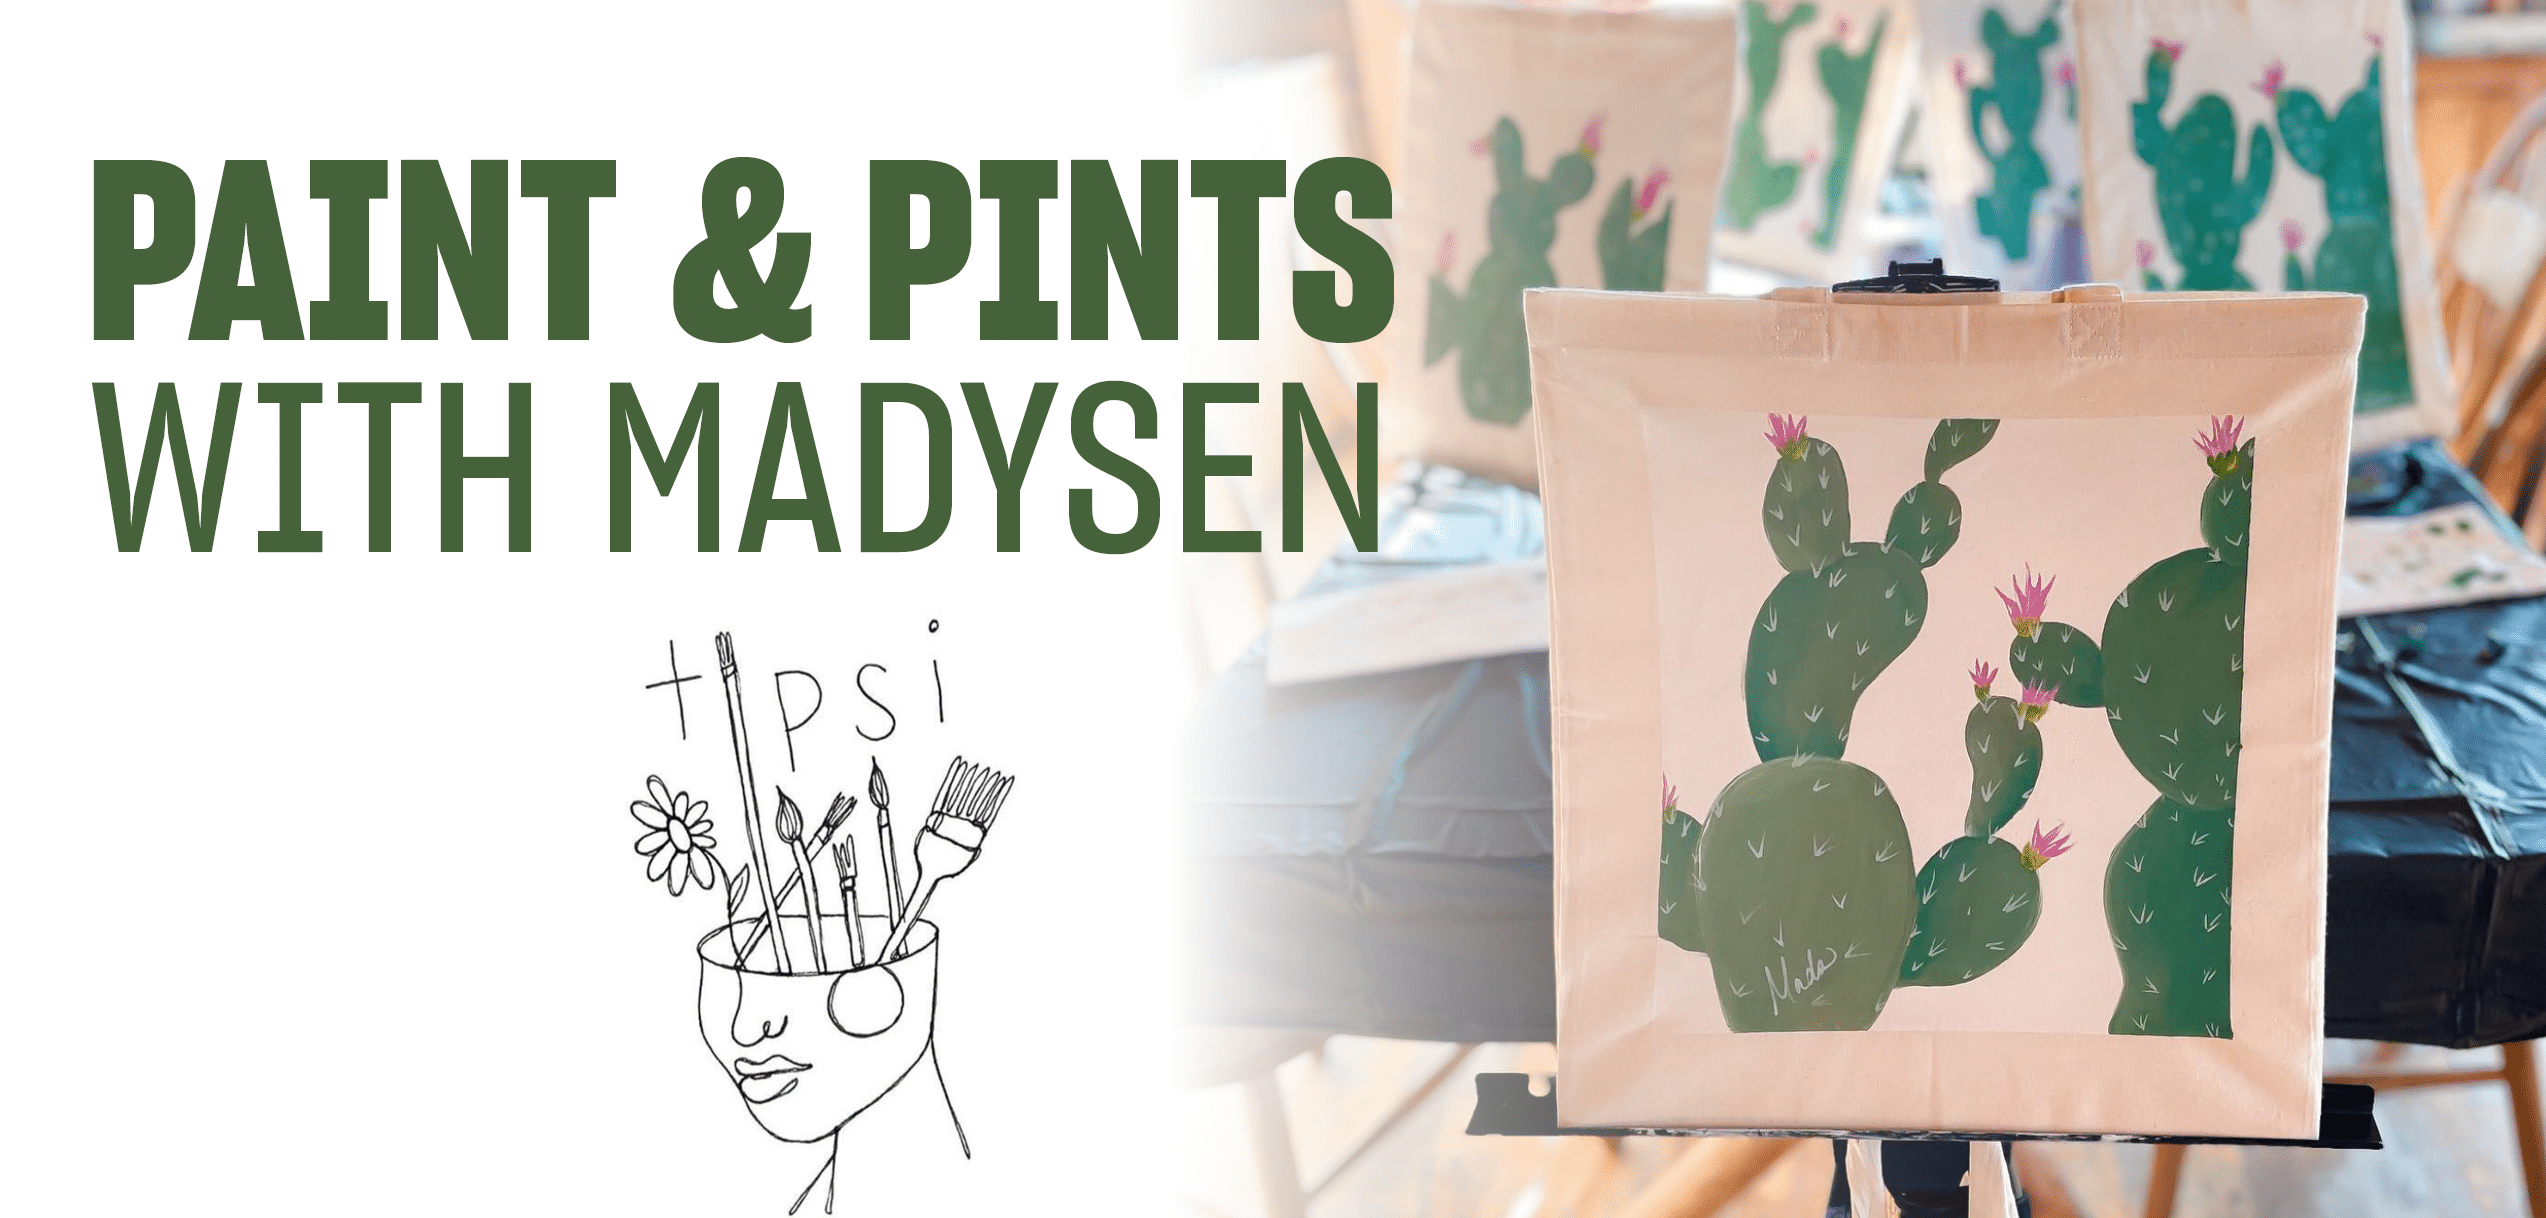 Paint and Pints with Madysen